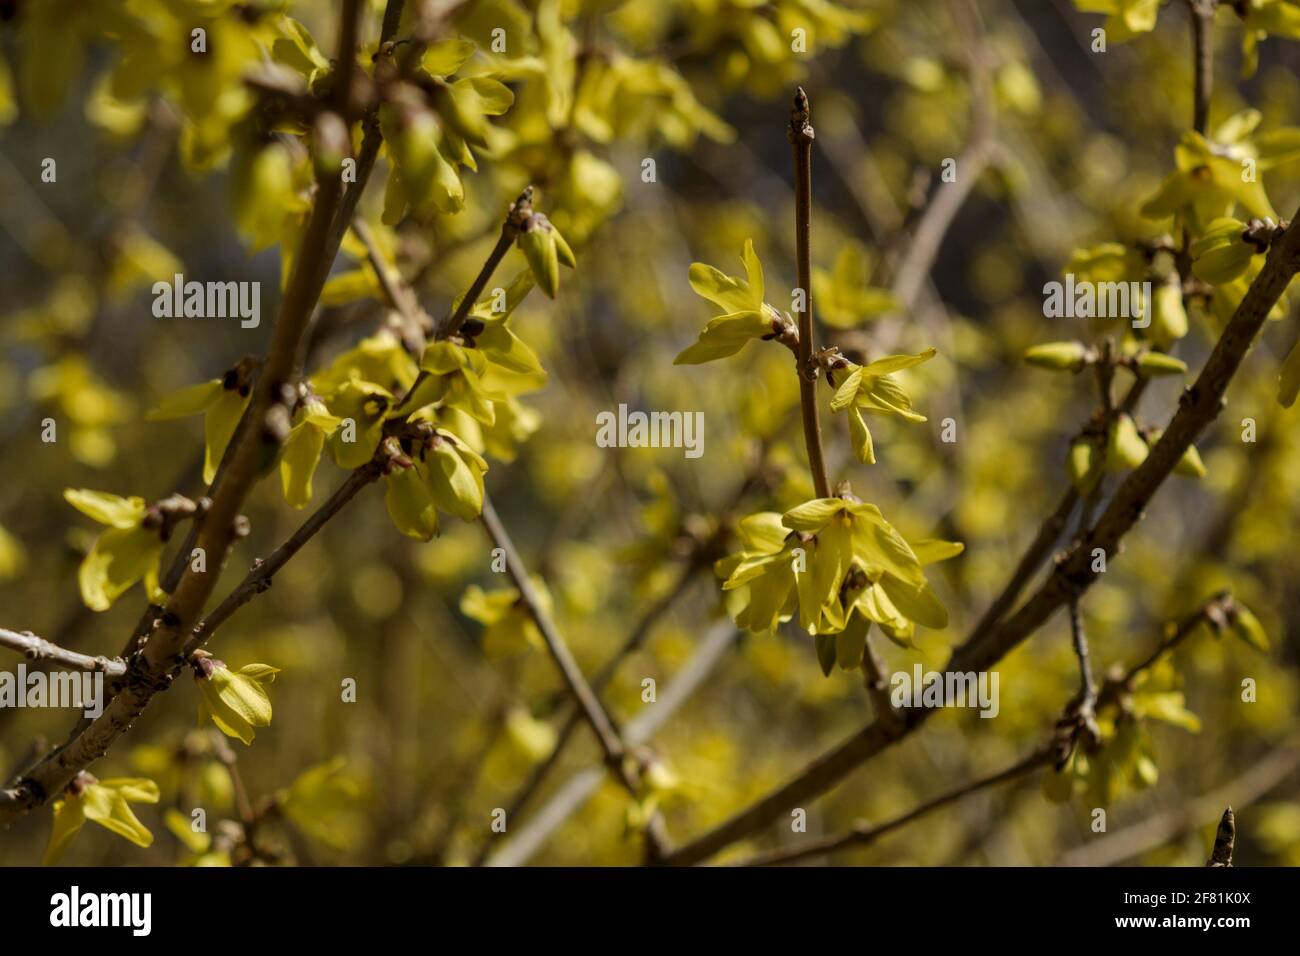 One of the early spring bloomers here in Canada - forsythia (Forsythia viridissima) looking splendid in the afternoon sunshine. Ottawa, Ontario. Stock Photo